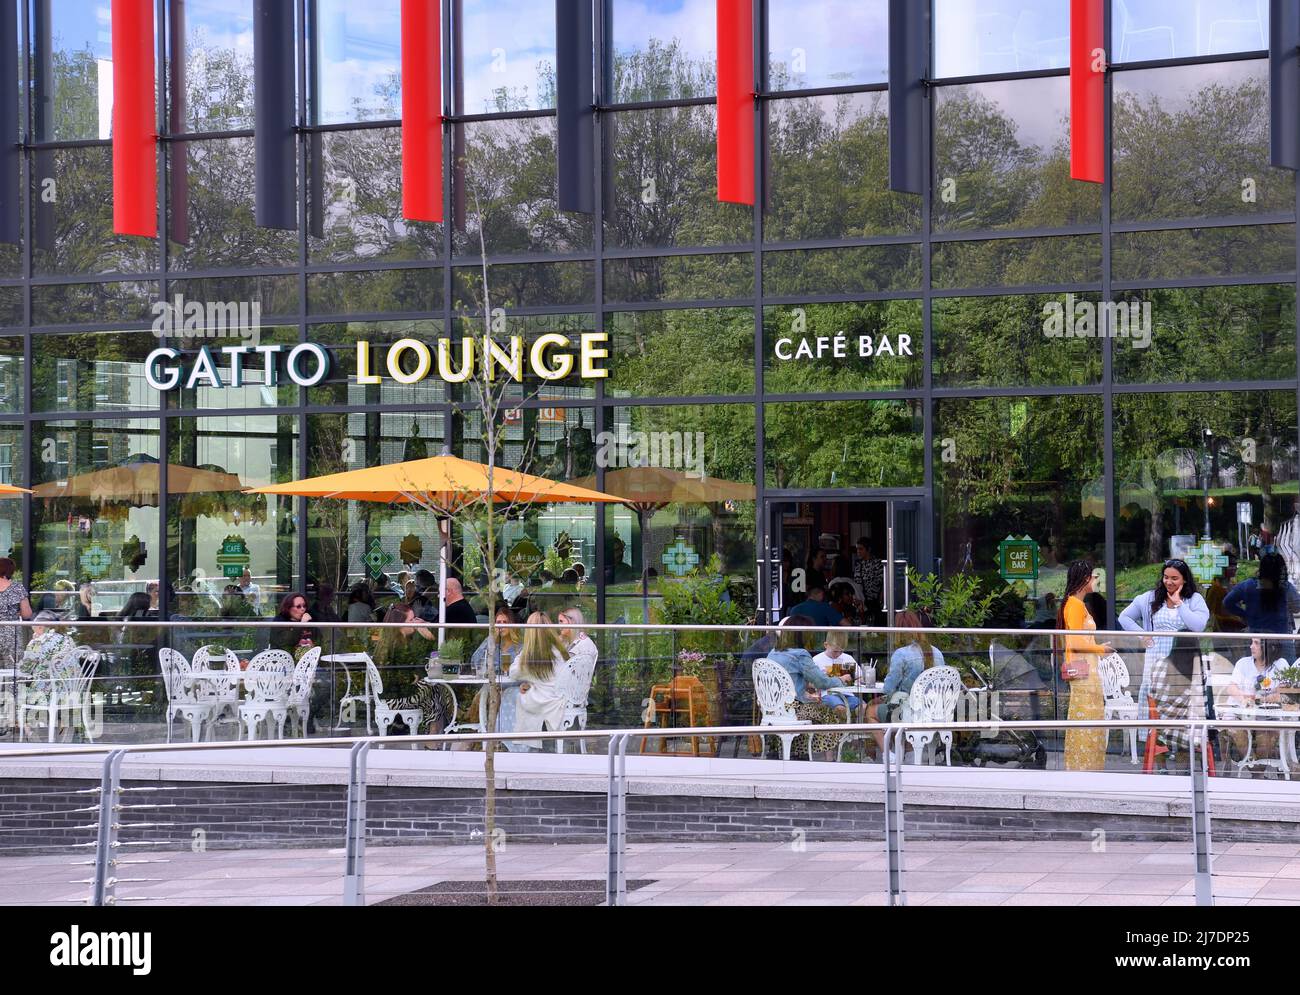 Stock Images of Pontypridd , Nantgarw and Taffs Well  The Gatto Lounge at  Llys Cadwyn Pontypridd  Picture by Richard Williams Photography Stock Photo